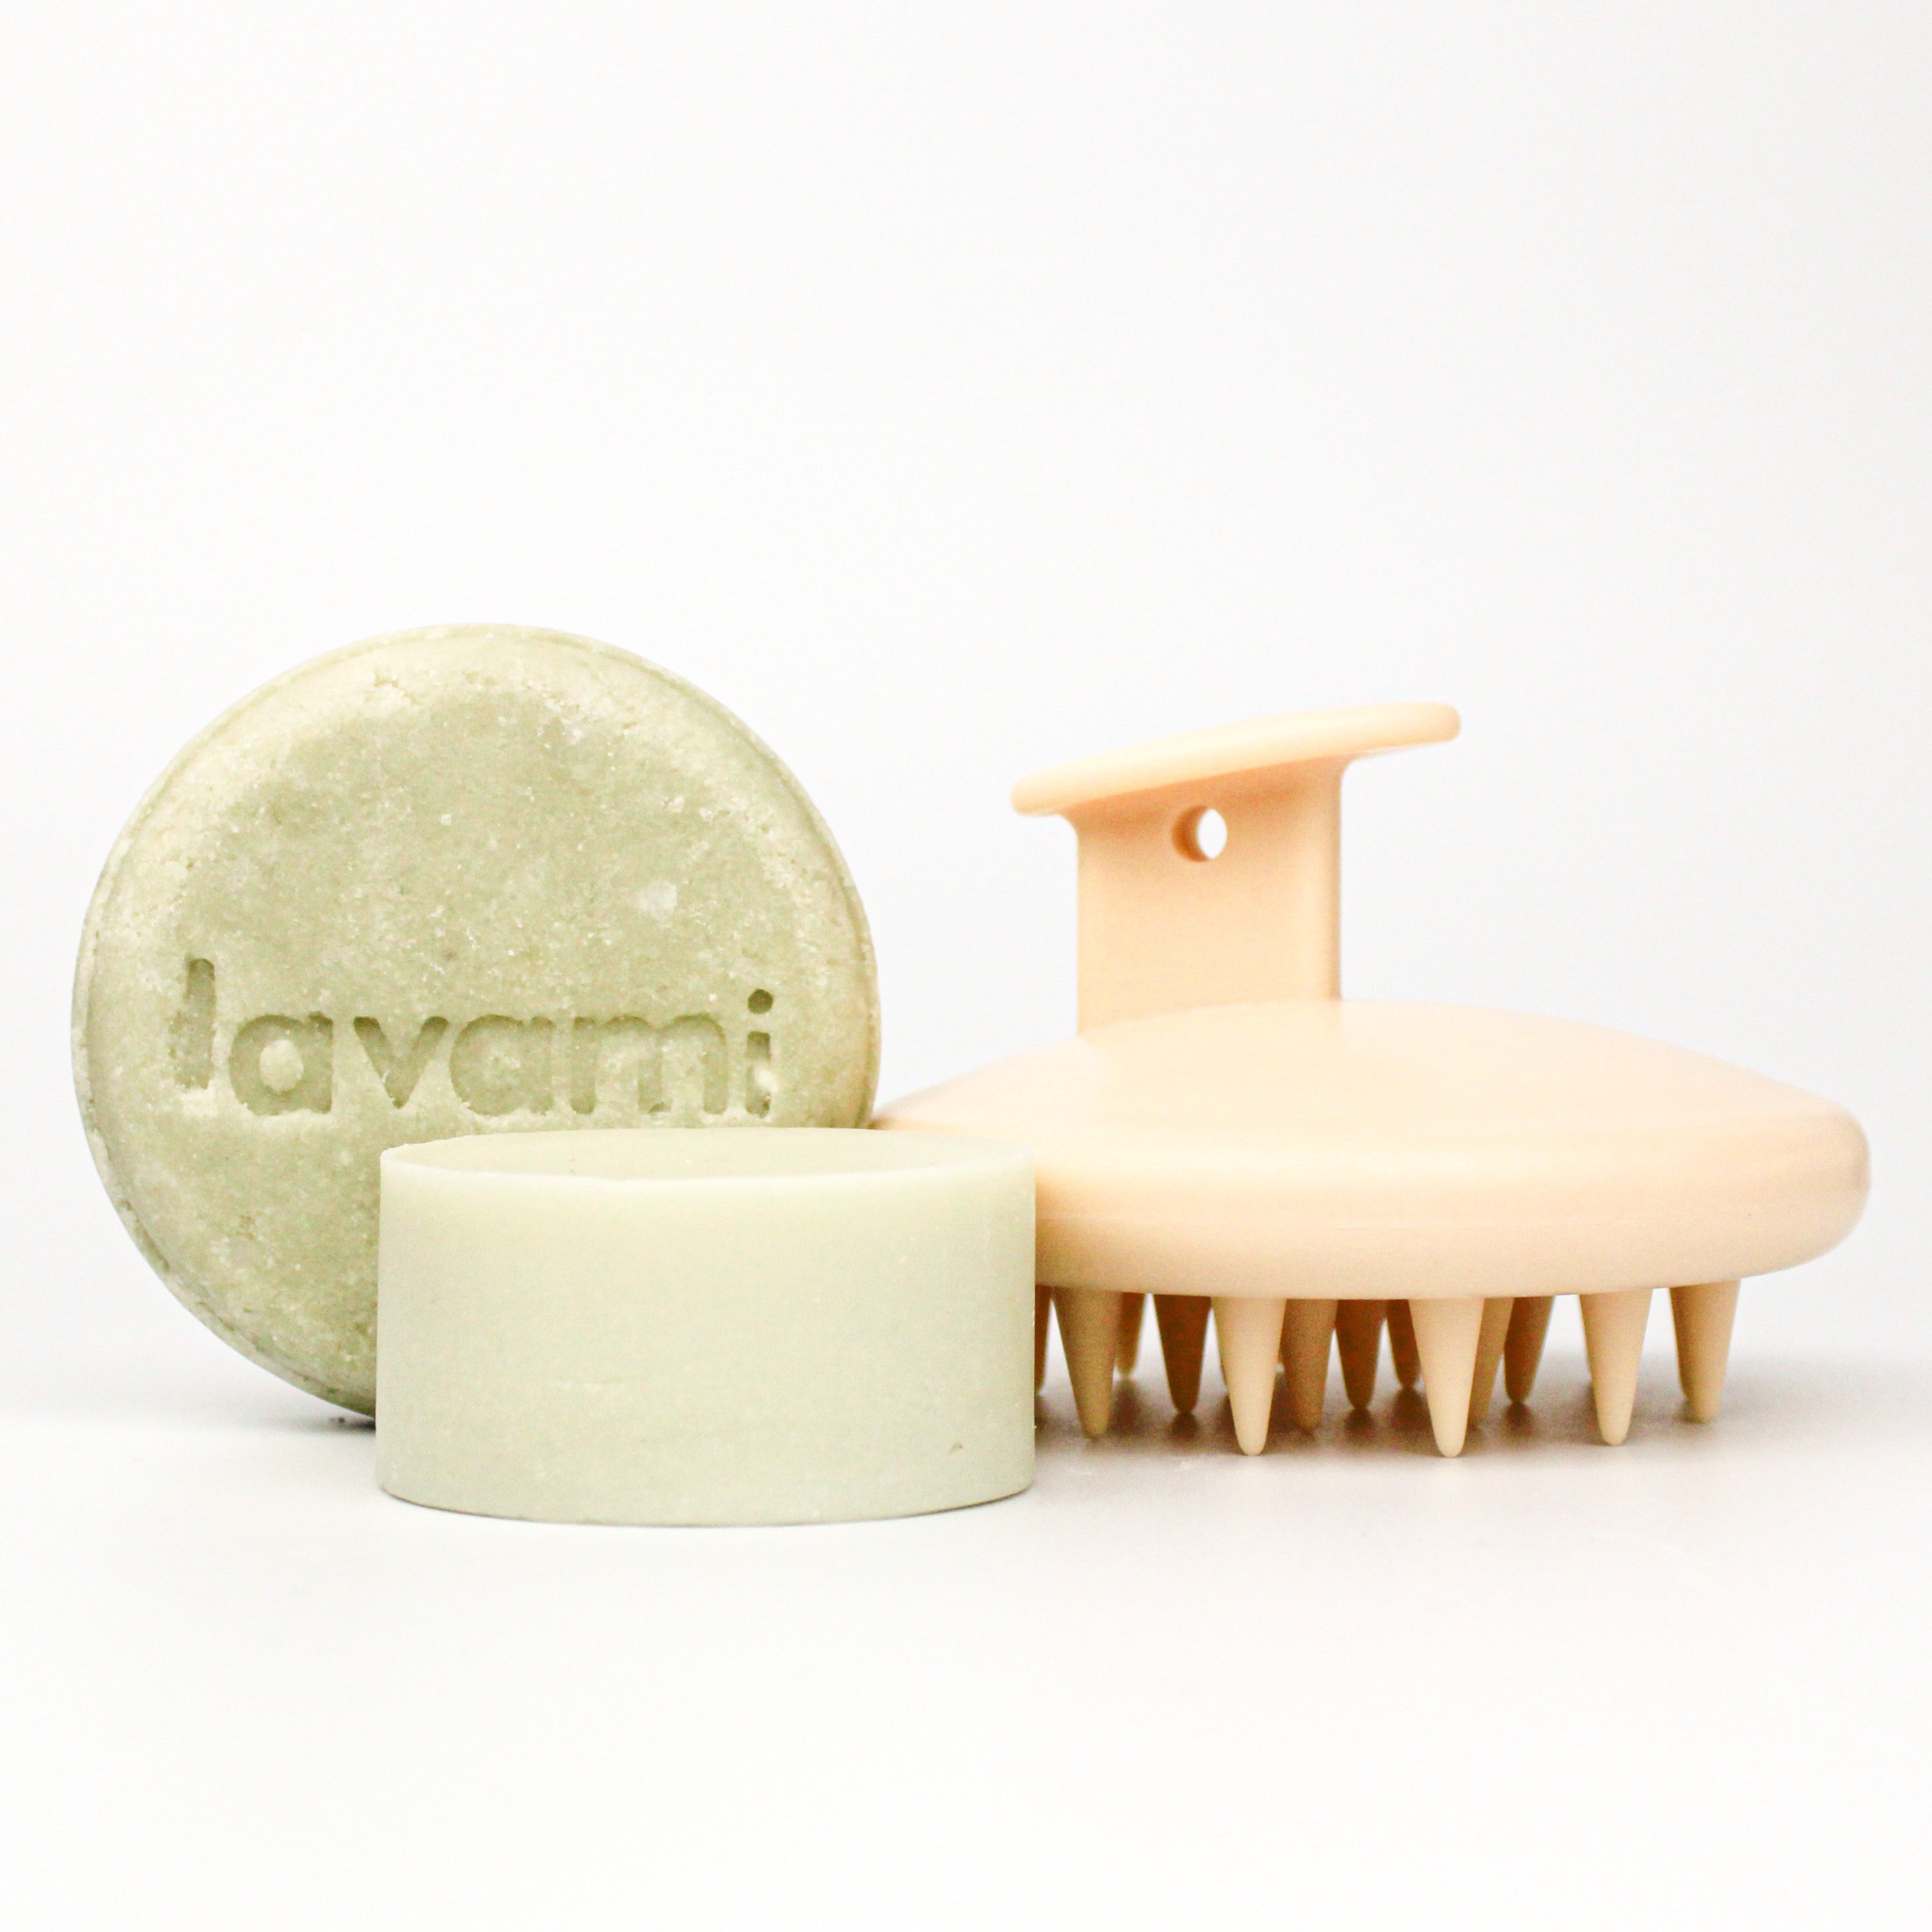 Lavami Shampoo and conditioner bar and scalp massager